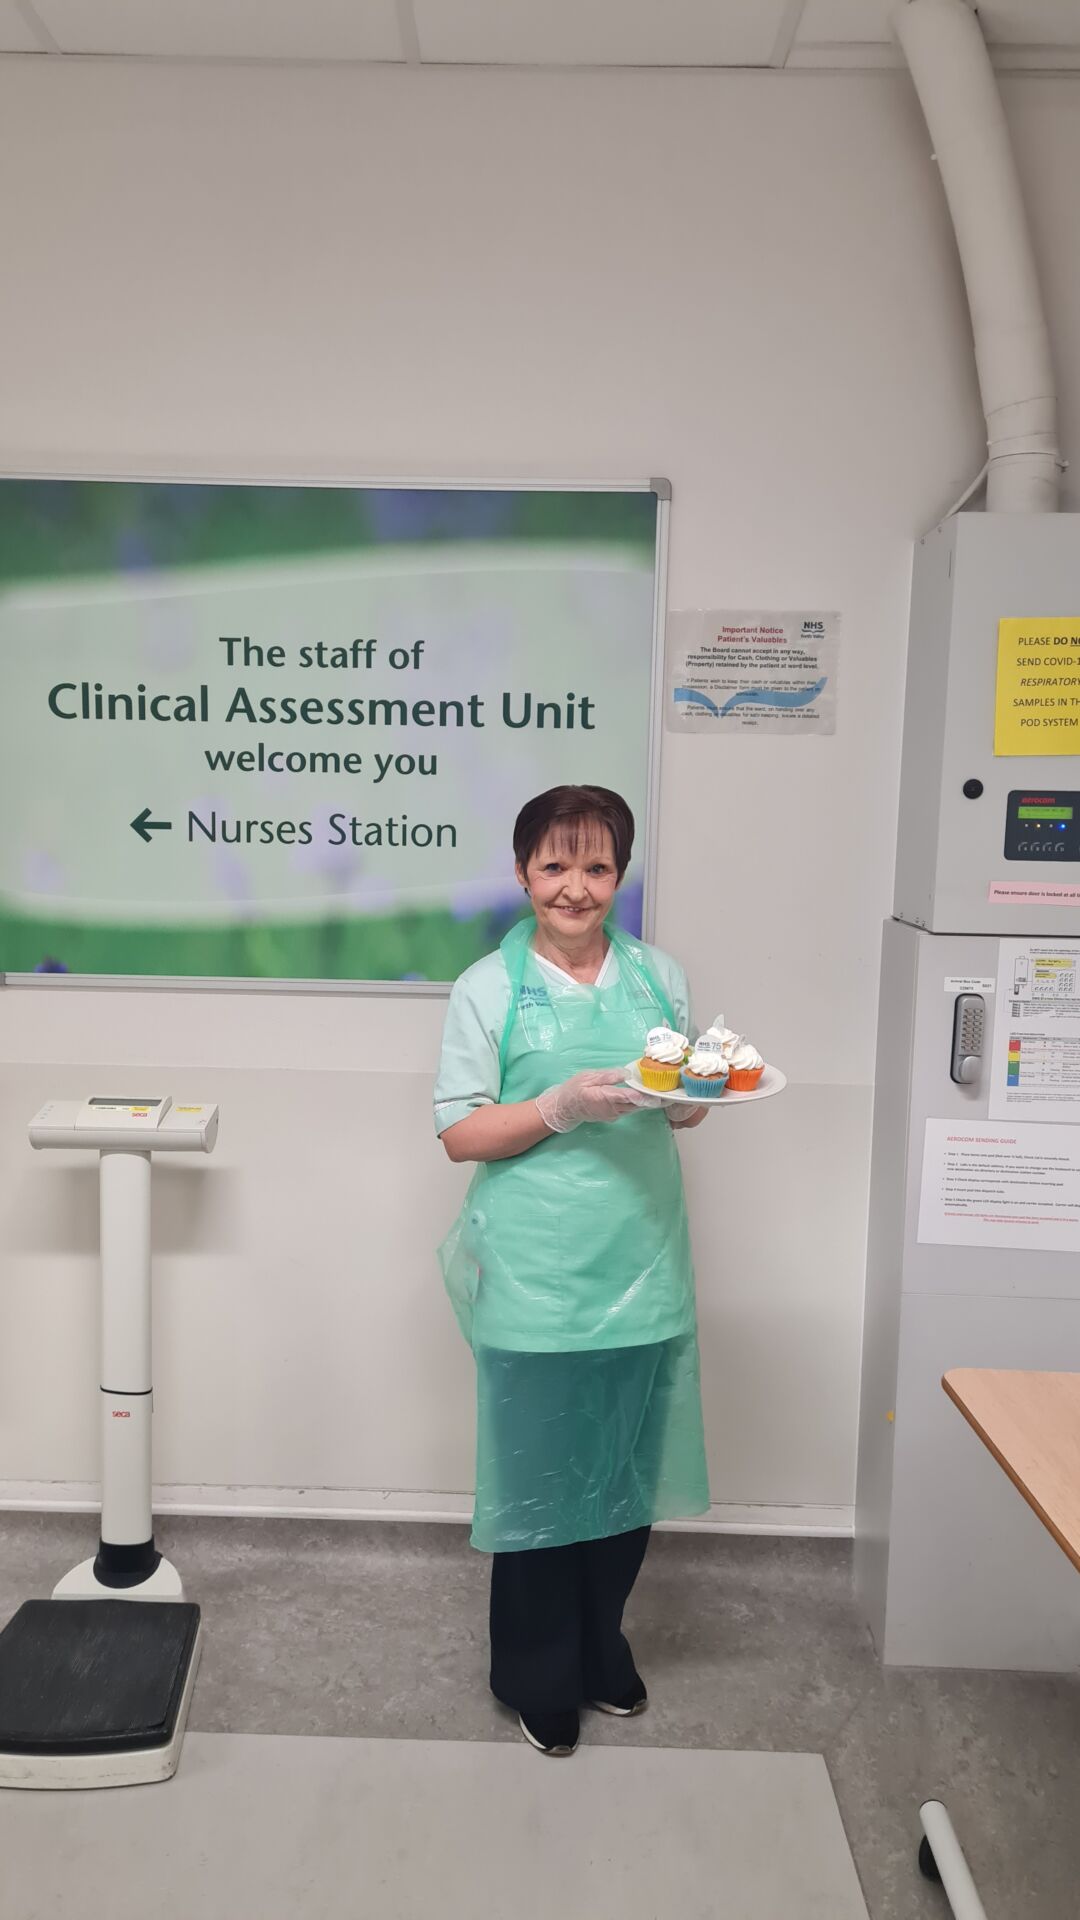 Anniversary cupcakes given to patients by serco